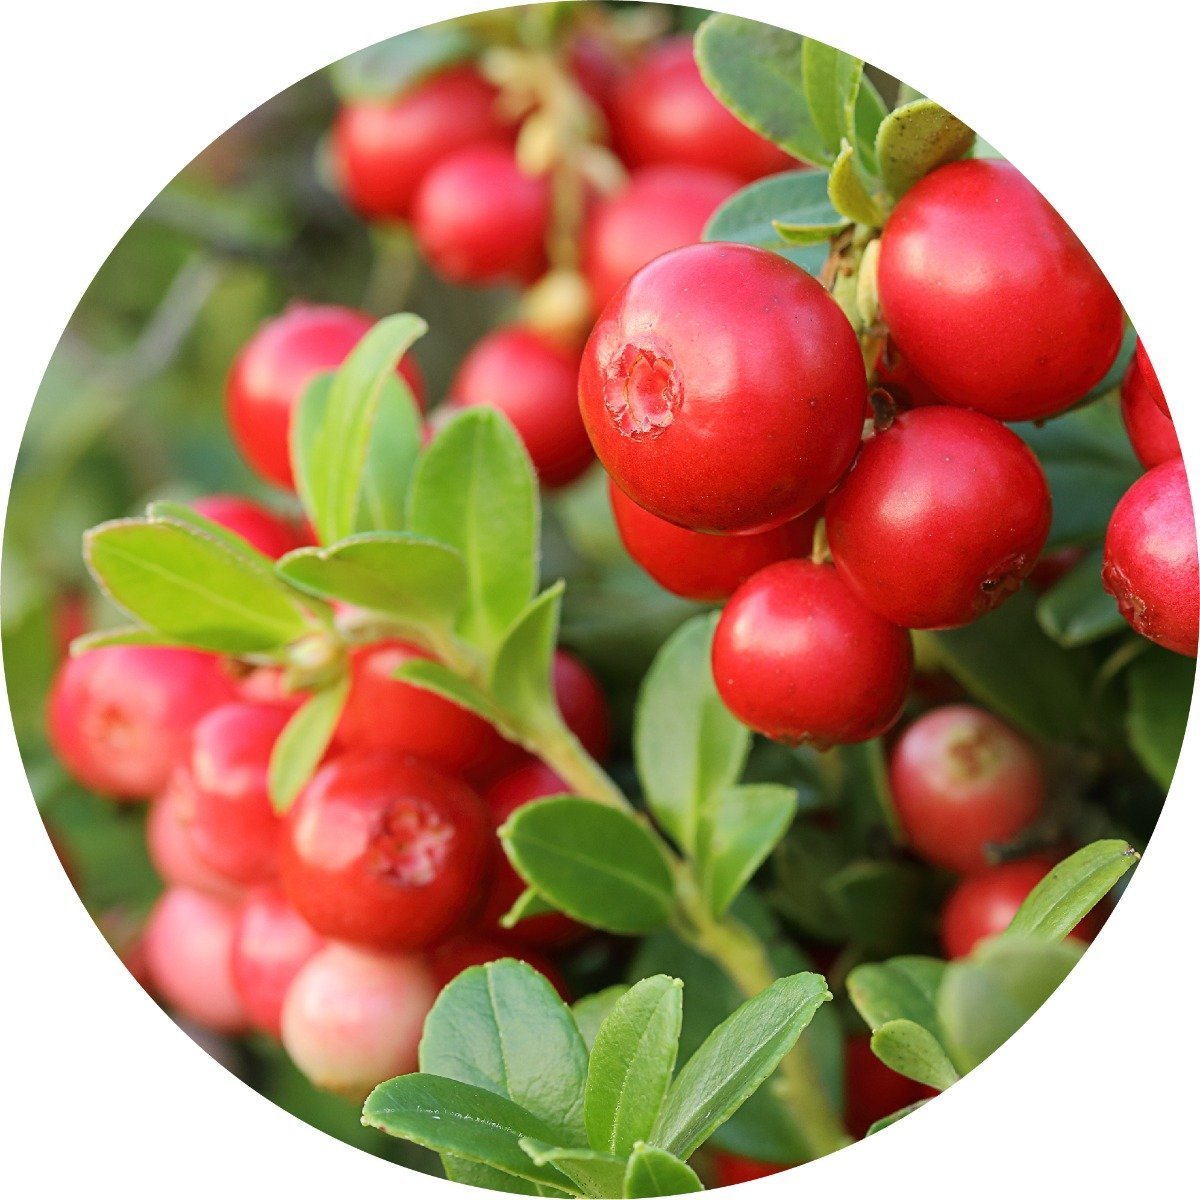 Cranberry Seed Carrier Oil